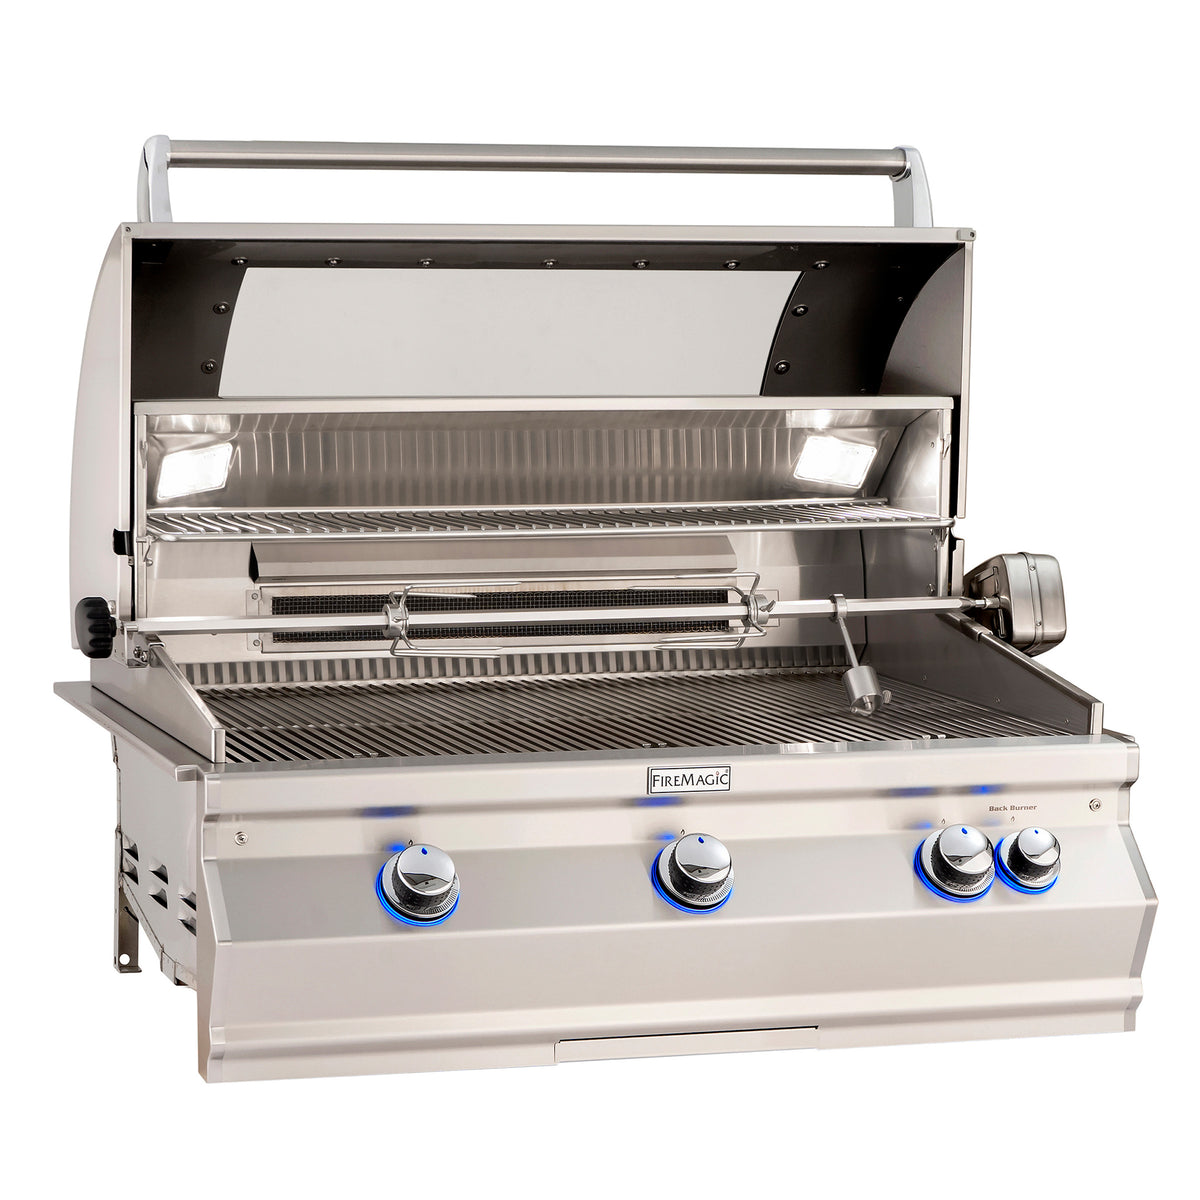 Fire Magic Aurora A790i Built-In Grills with Analog Thermometer Liquid Propane